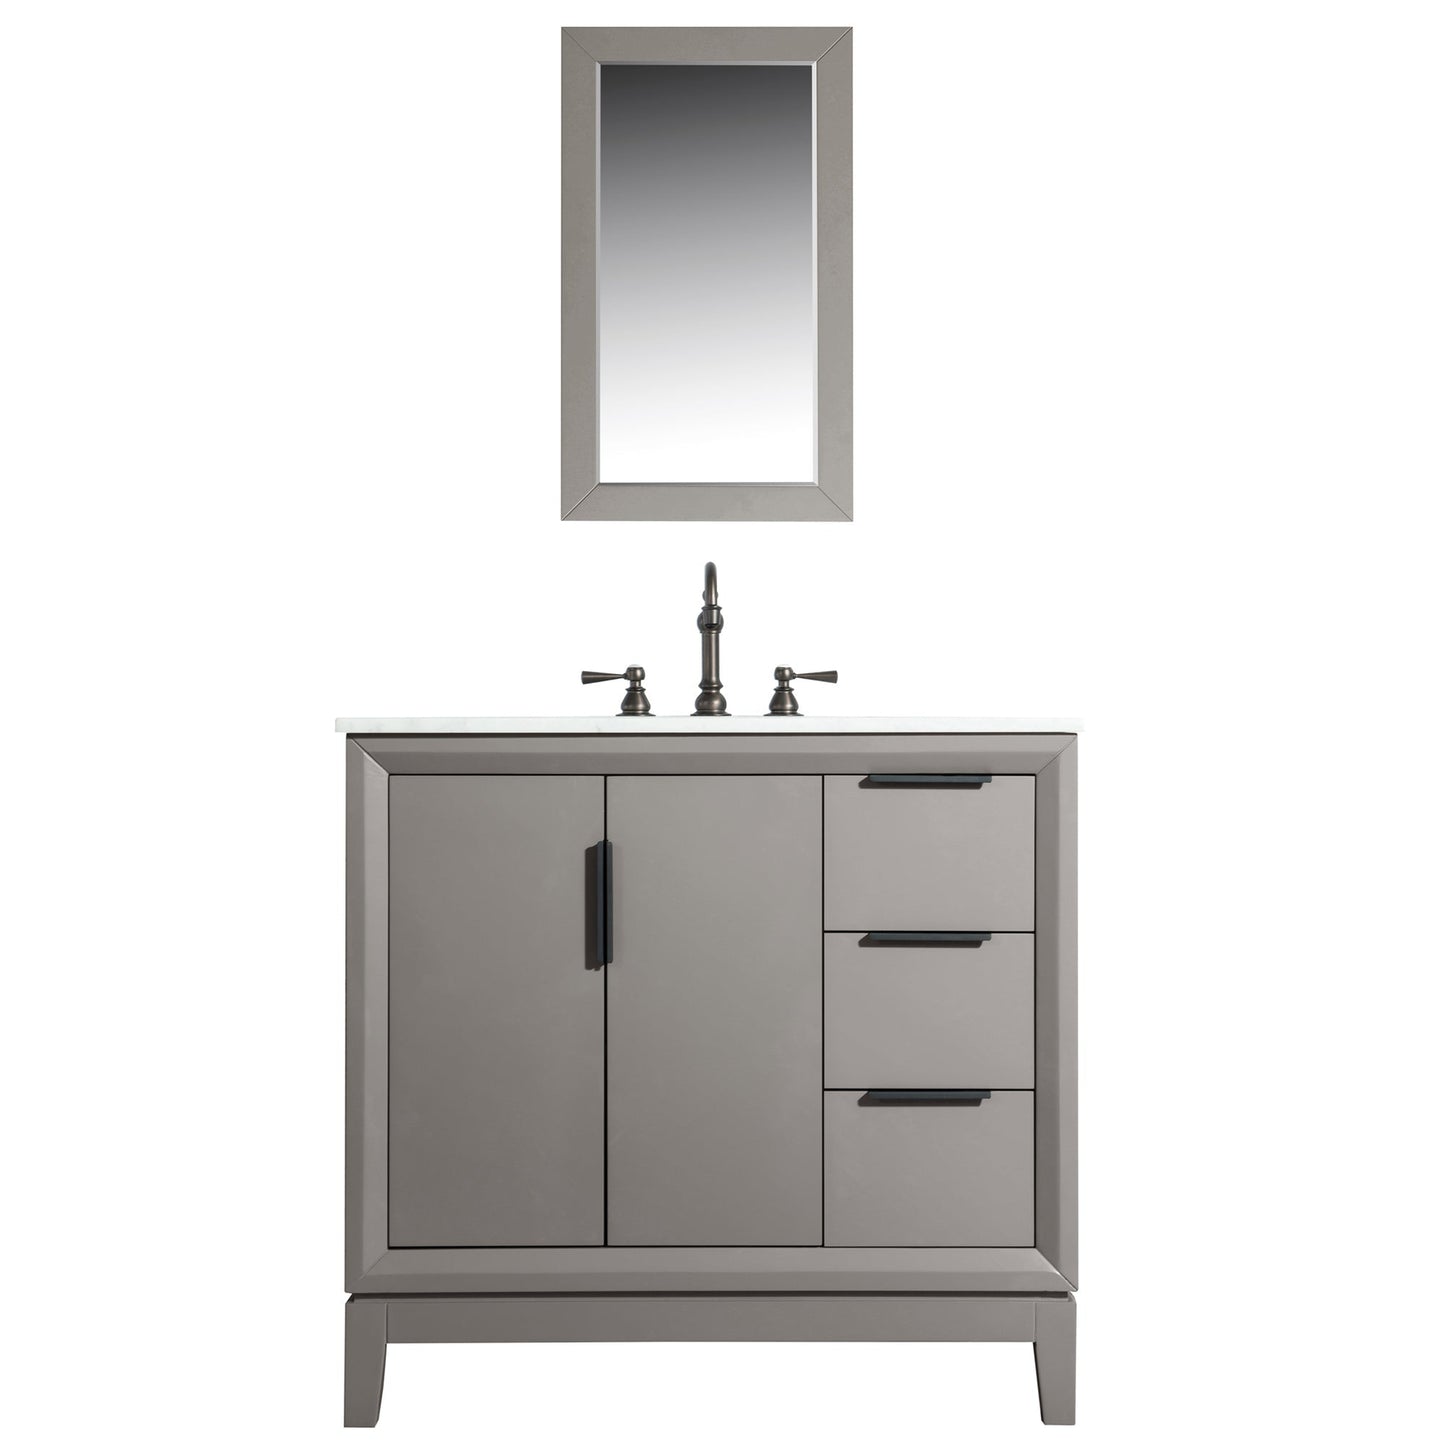 Water Creation Elizabeth 36" Single Sink Carrara White Marble Vanity In Cashmere Grey With Matching Mirror and F2-0012-03-TL Lavatory Faucet